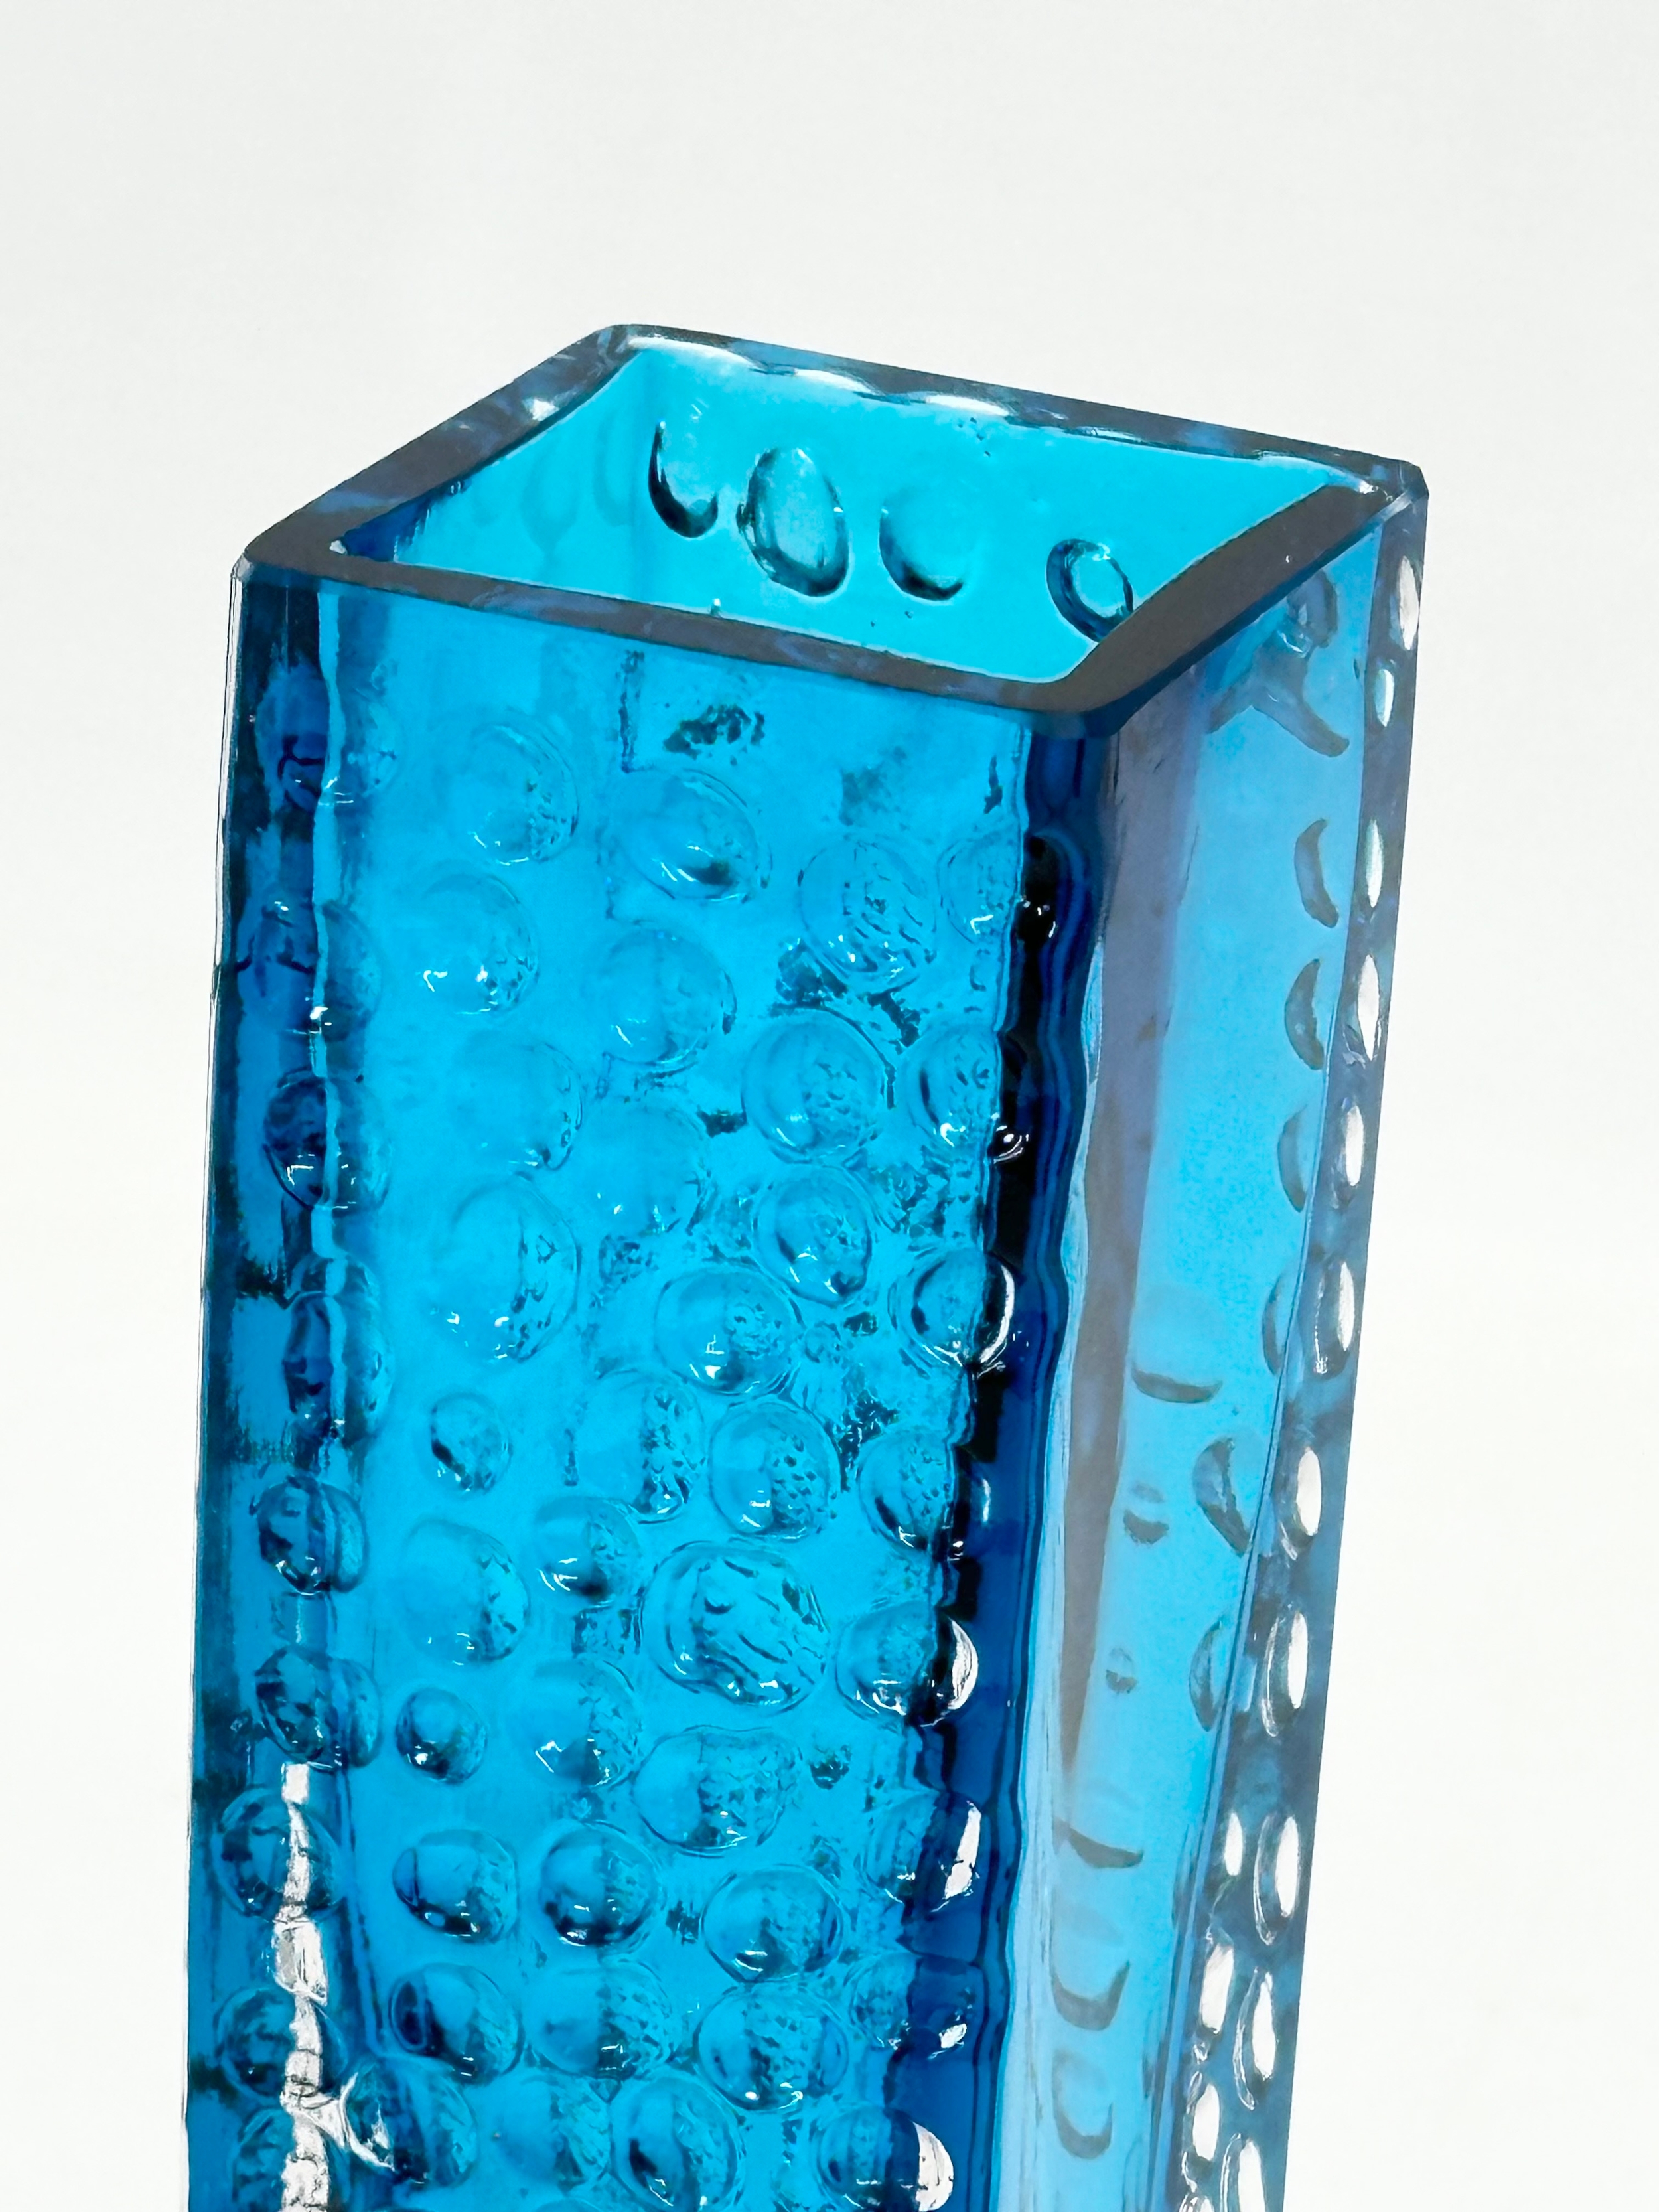 A Kingfisher Blue ‘Nailhead’ vase designed by Geoffrey Baxter for Whitefriars. 4.5x45.5x17cm. - Image 2 of 4